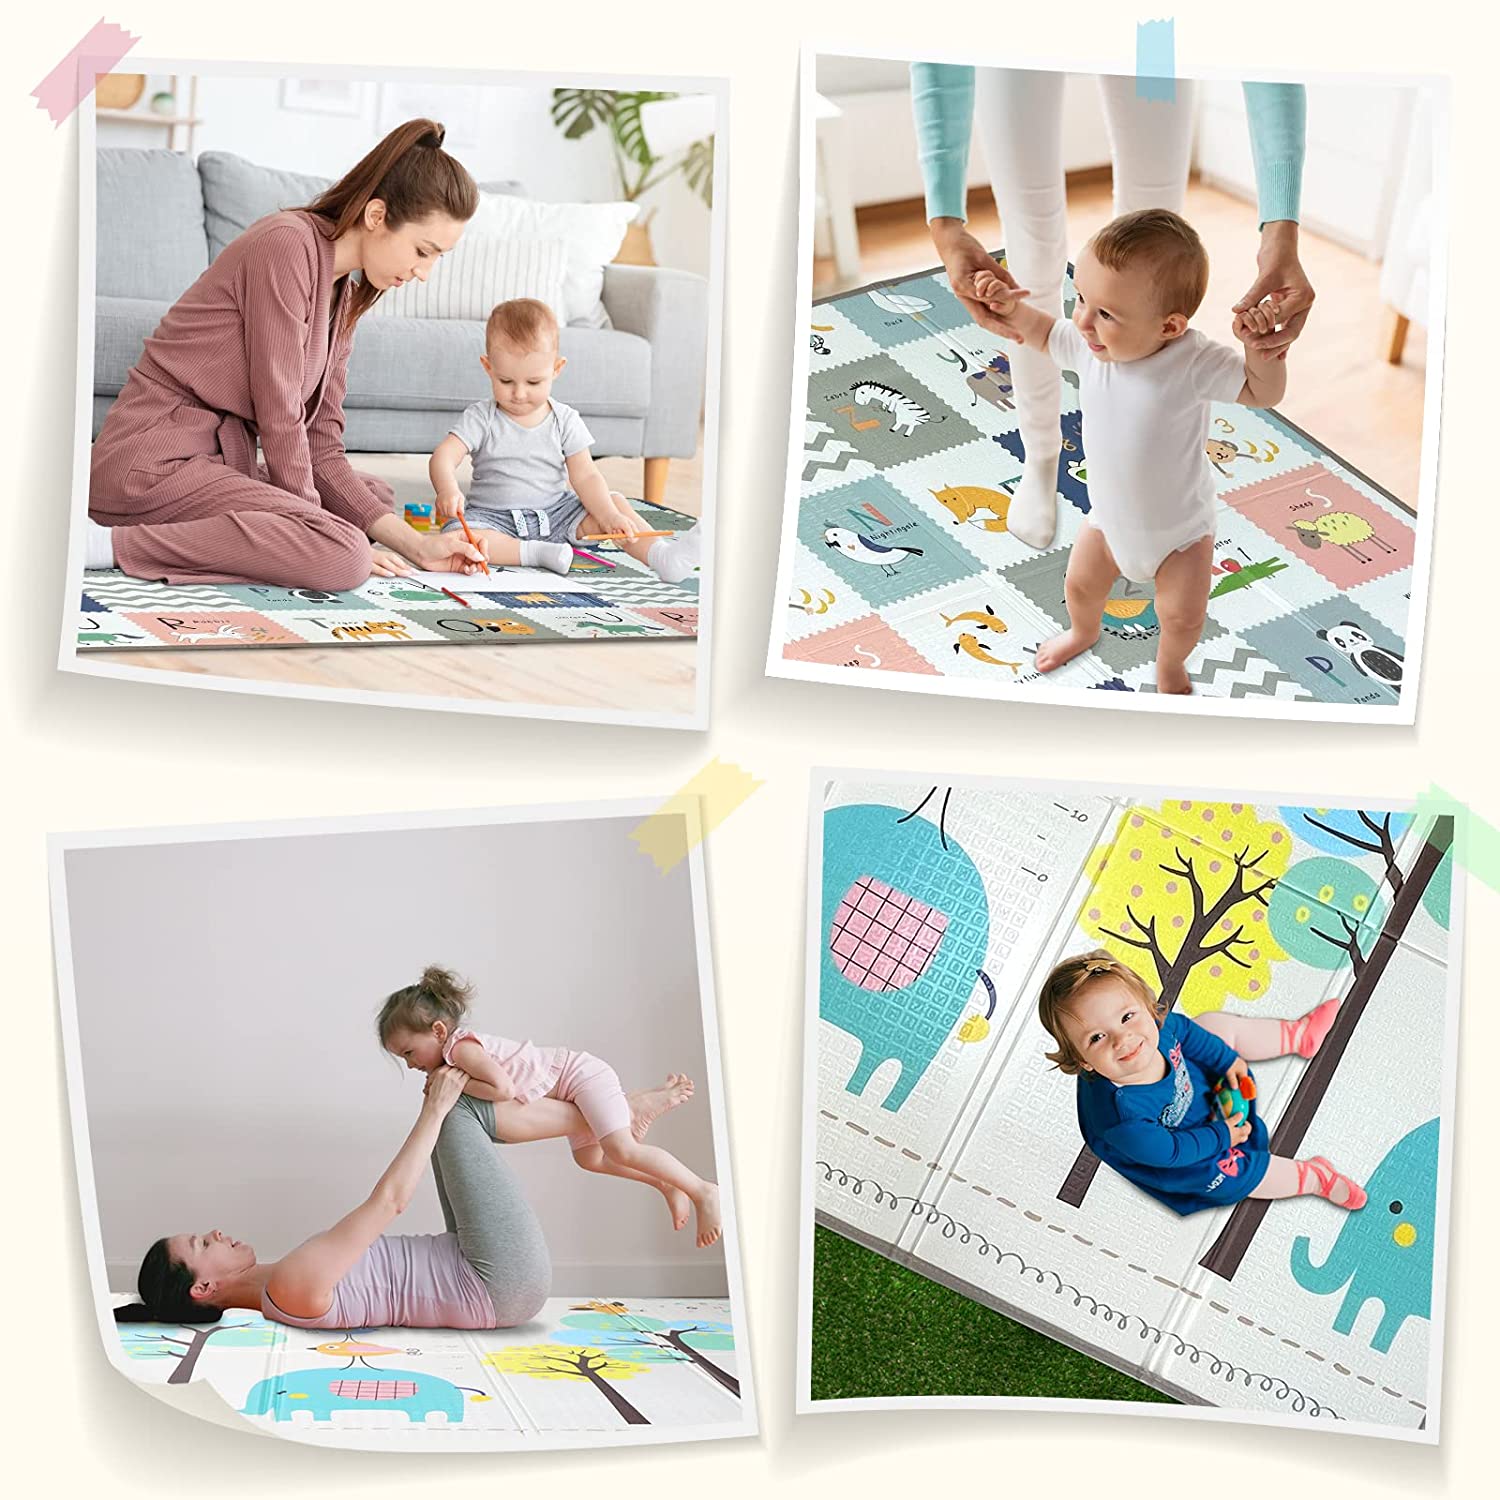 Mergren Large Waterproof XPE Foam Baby Play Mat with Reversible Patterns  and Anti-Slip Floor Colorful Animal Crawling Mat for Infants- 79 x 71 